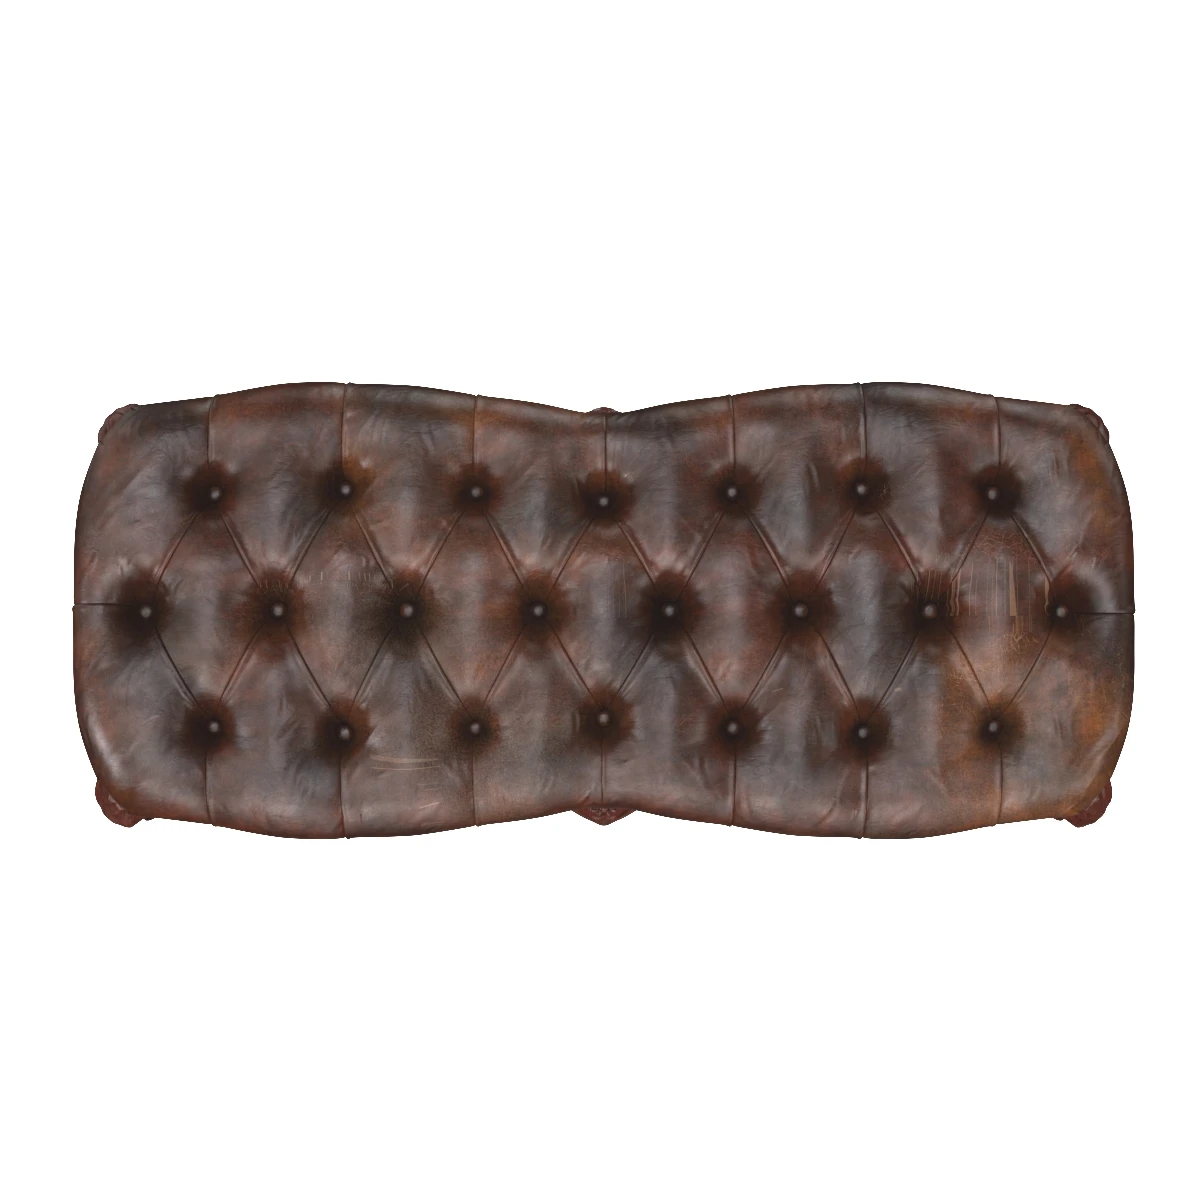 French Leather Tufted Bench C 1900s 3D Model_03